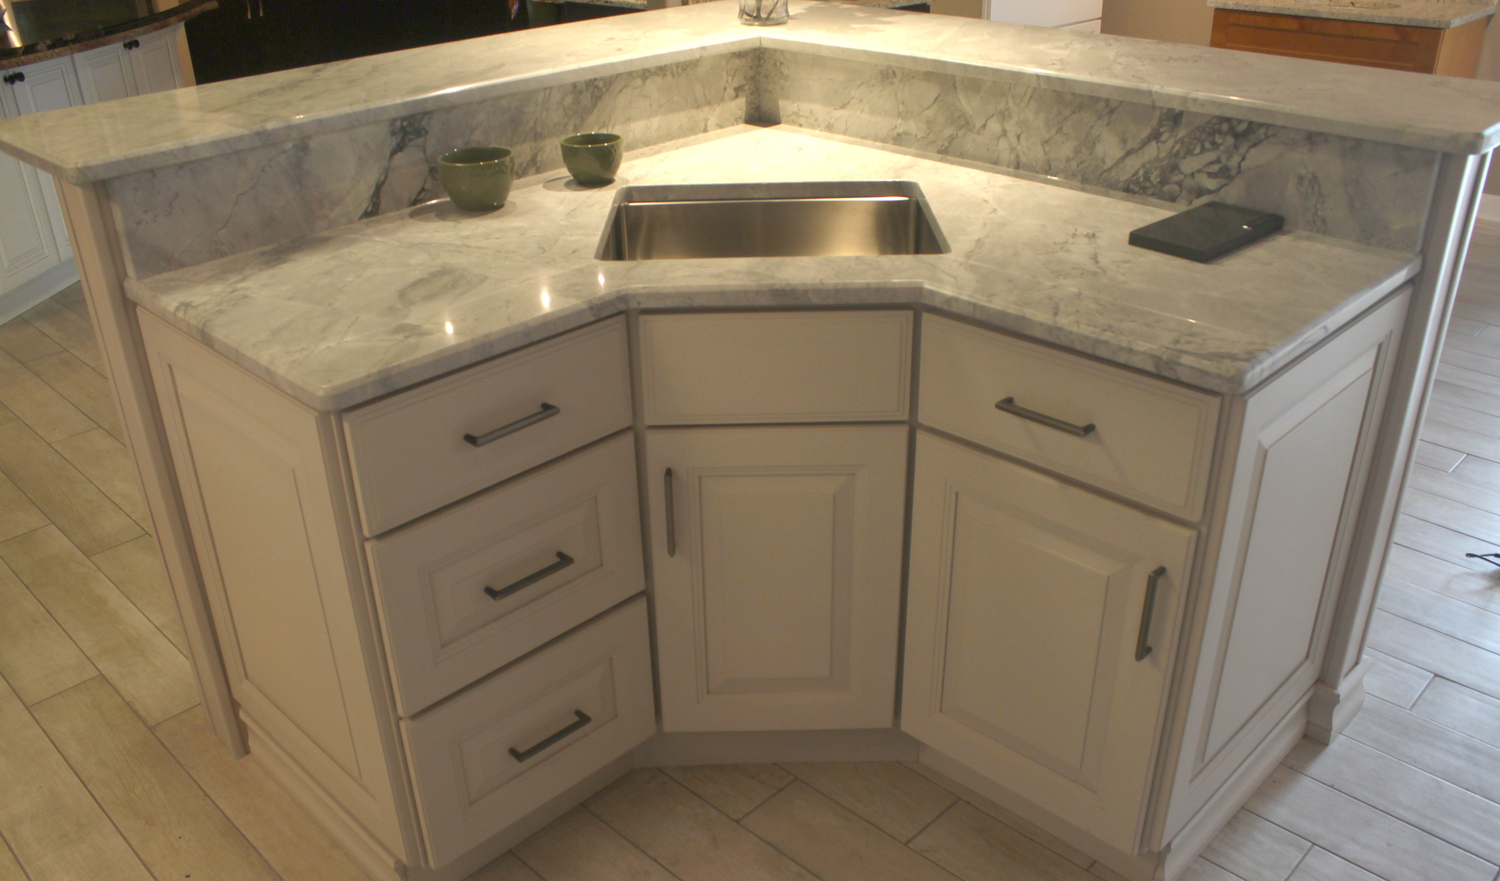 Evanston Kitchen Cabinets Sinks And Countertops Rock Counter